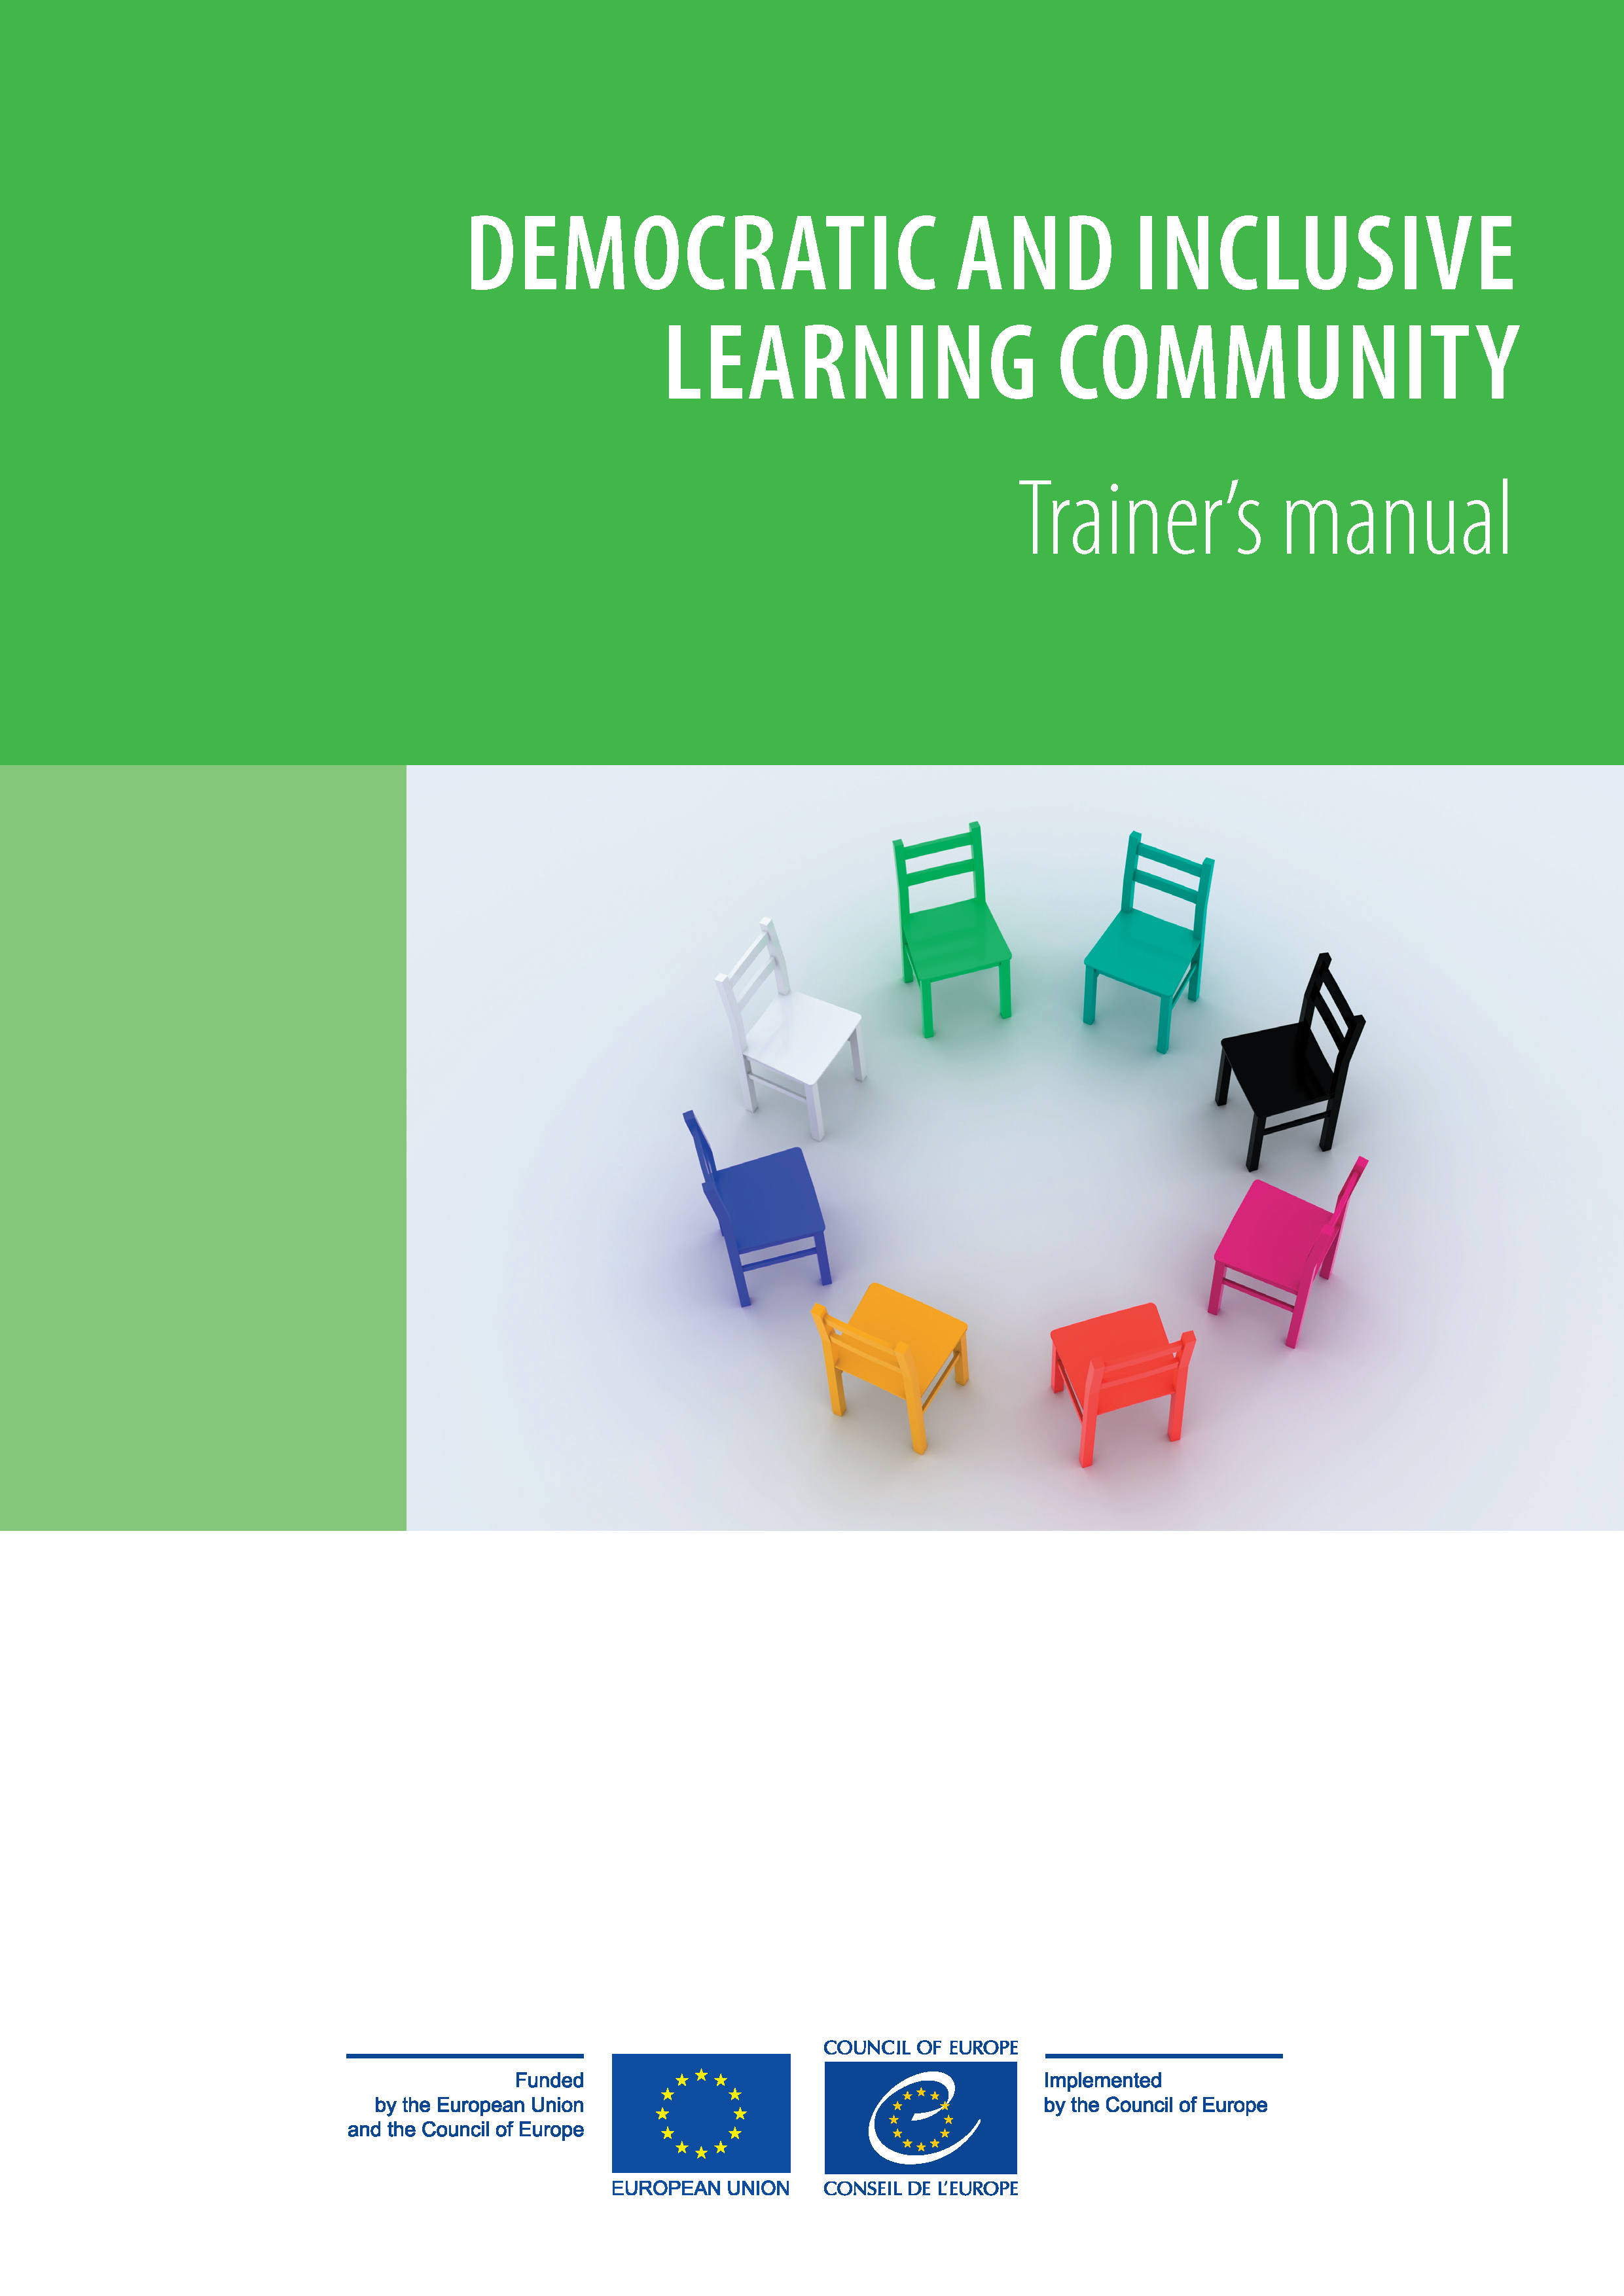 Democratic and Inclusive Learning Community - Trainer’s manual